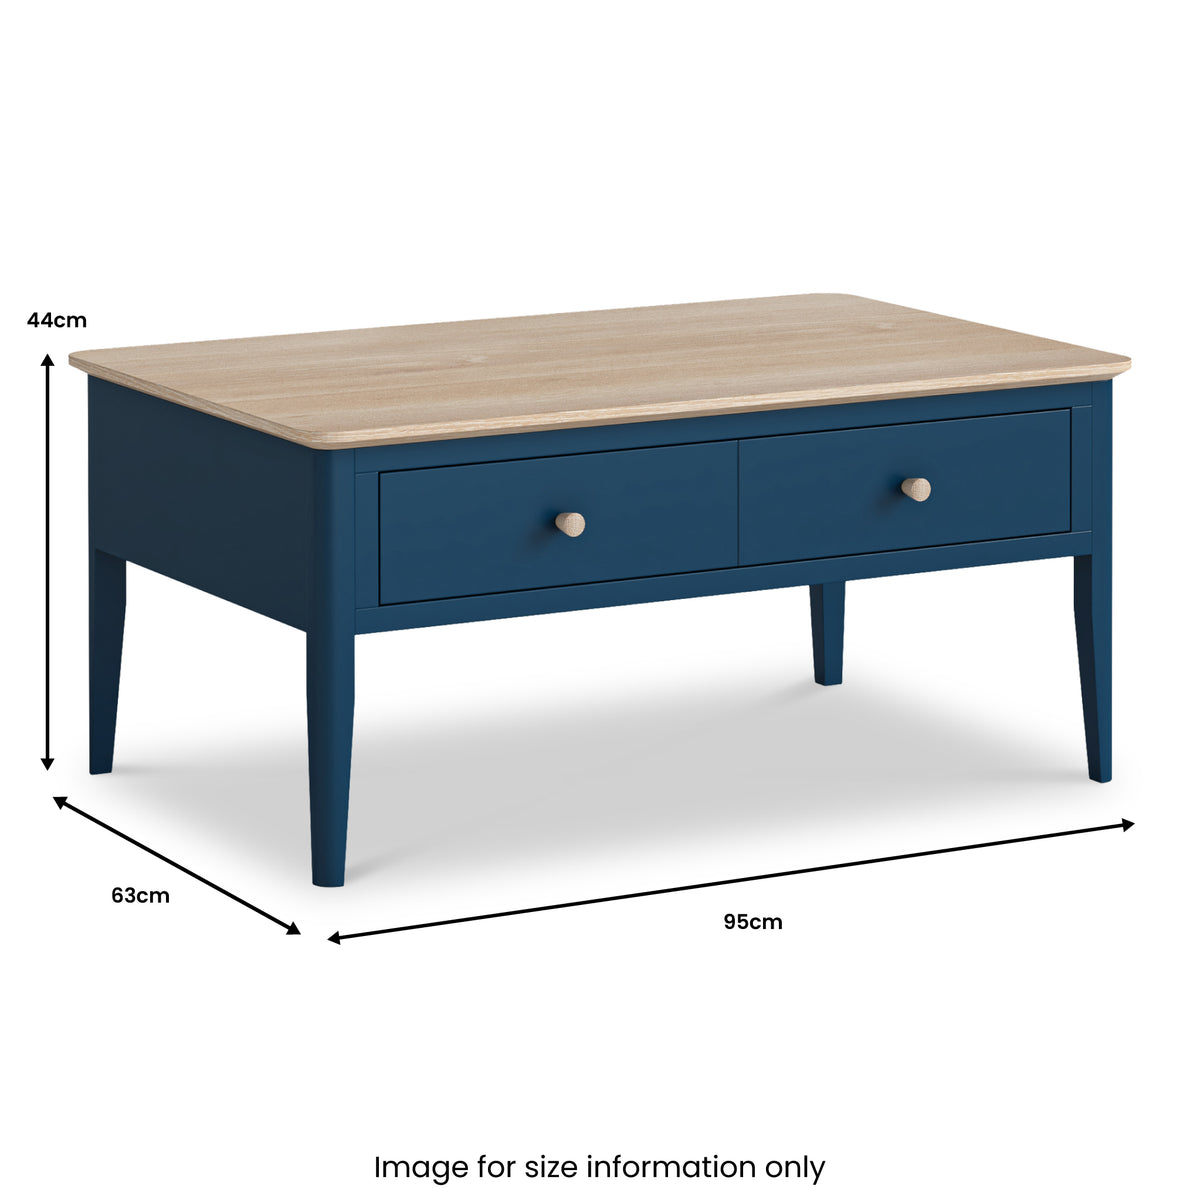 Penrose Coffee Table Dimensions